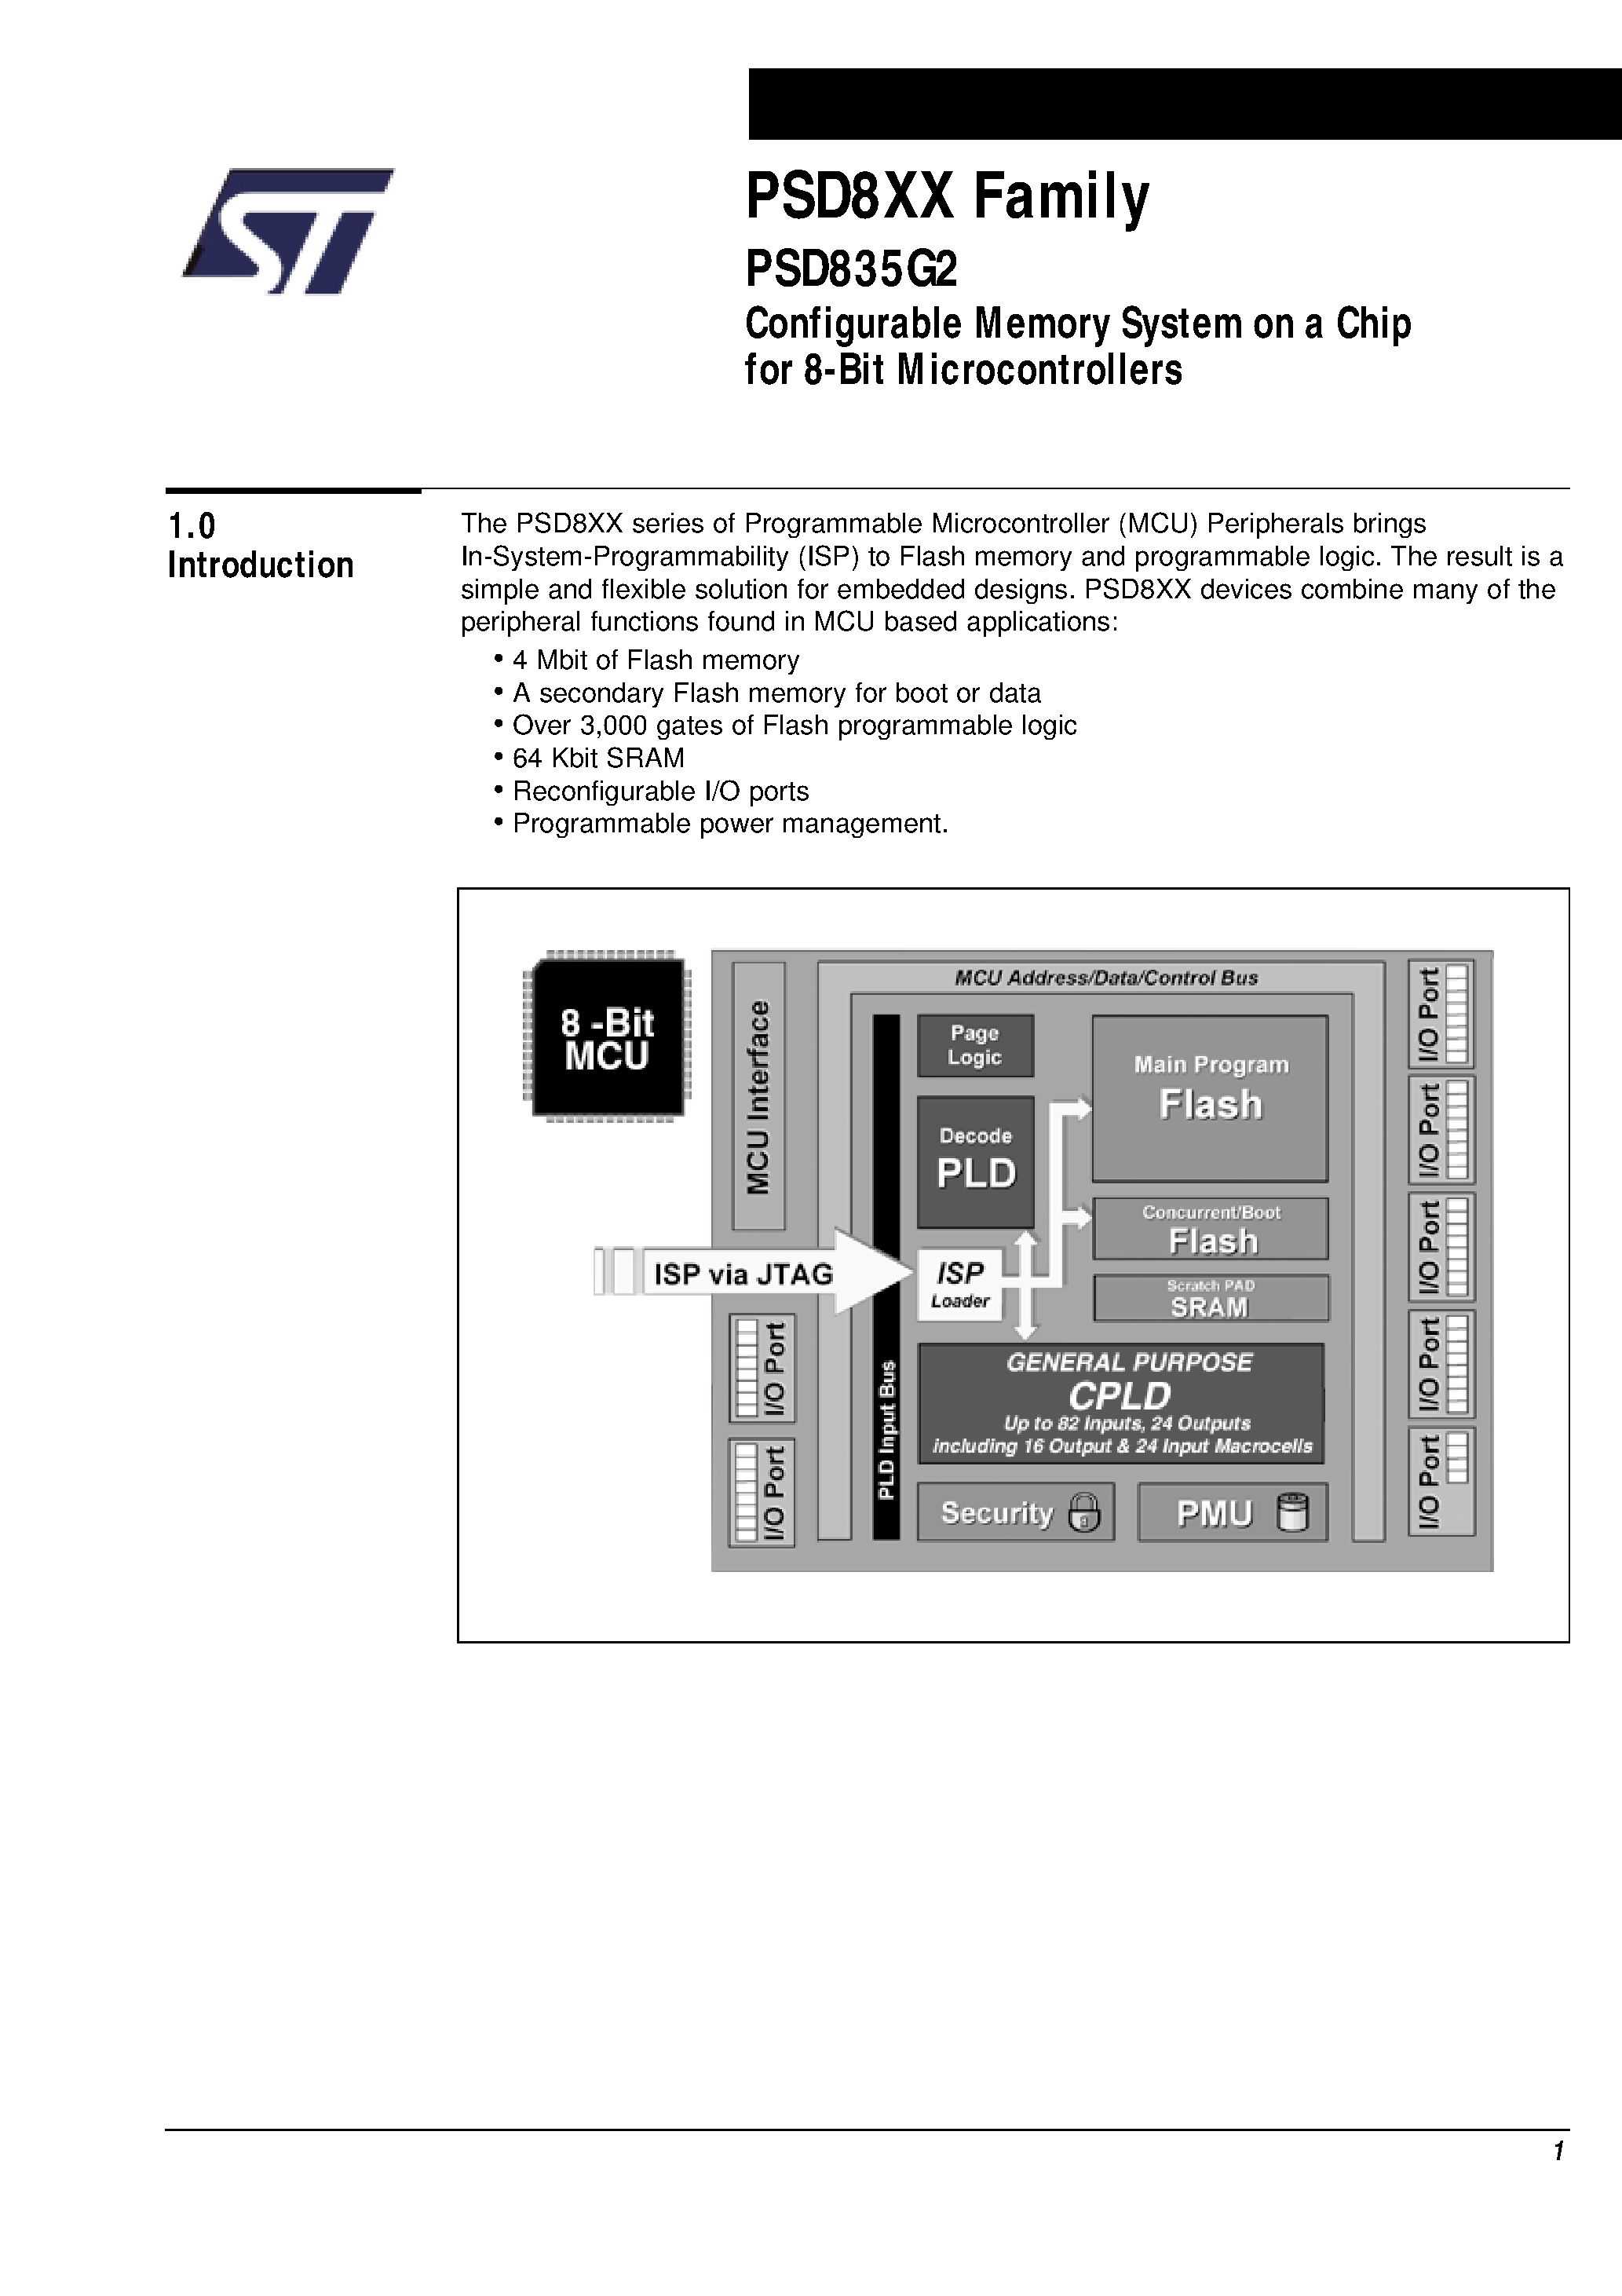 Datasheet PSD835F2V-A-70M - Configurable Memory System on a Chip for 8-Bit Microcontrollers page 2